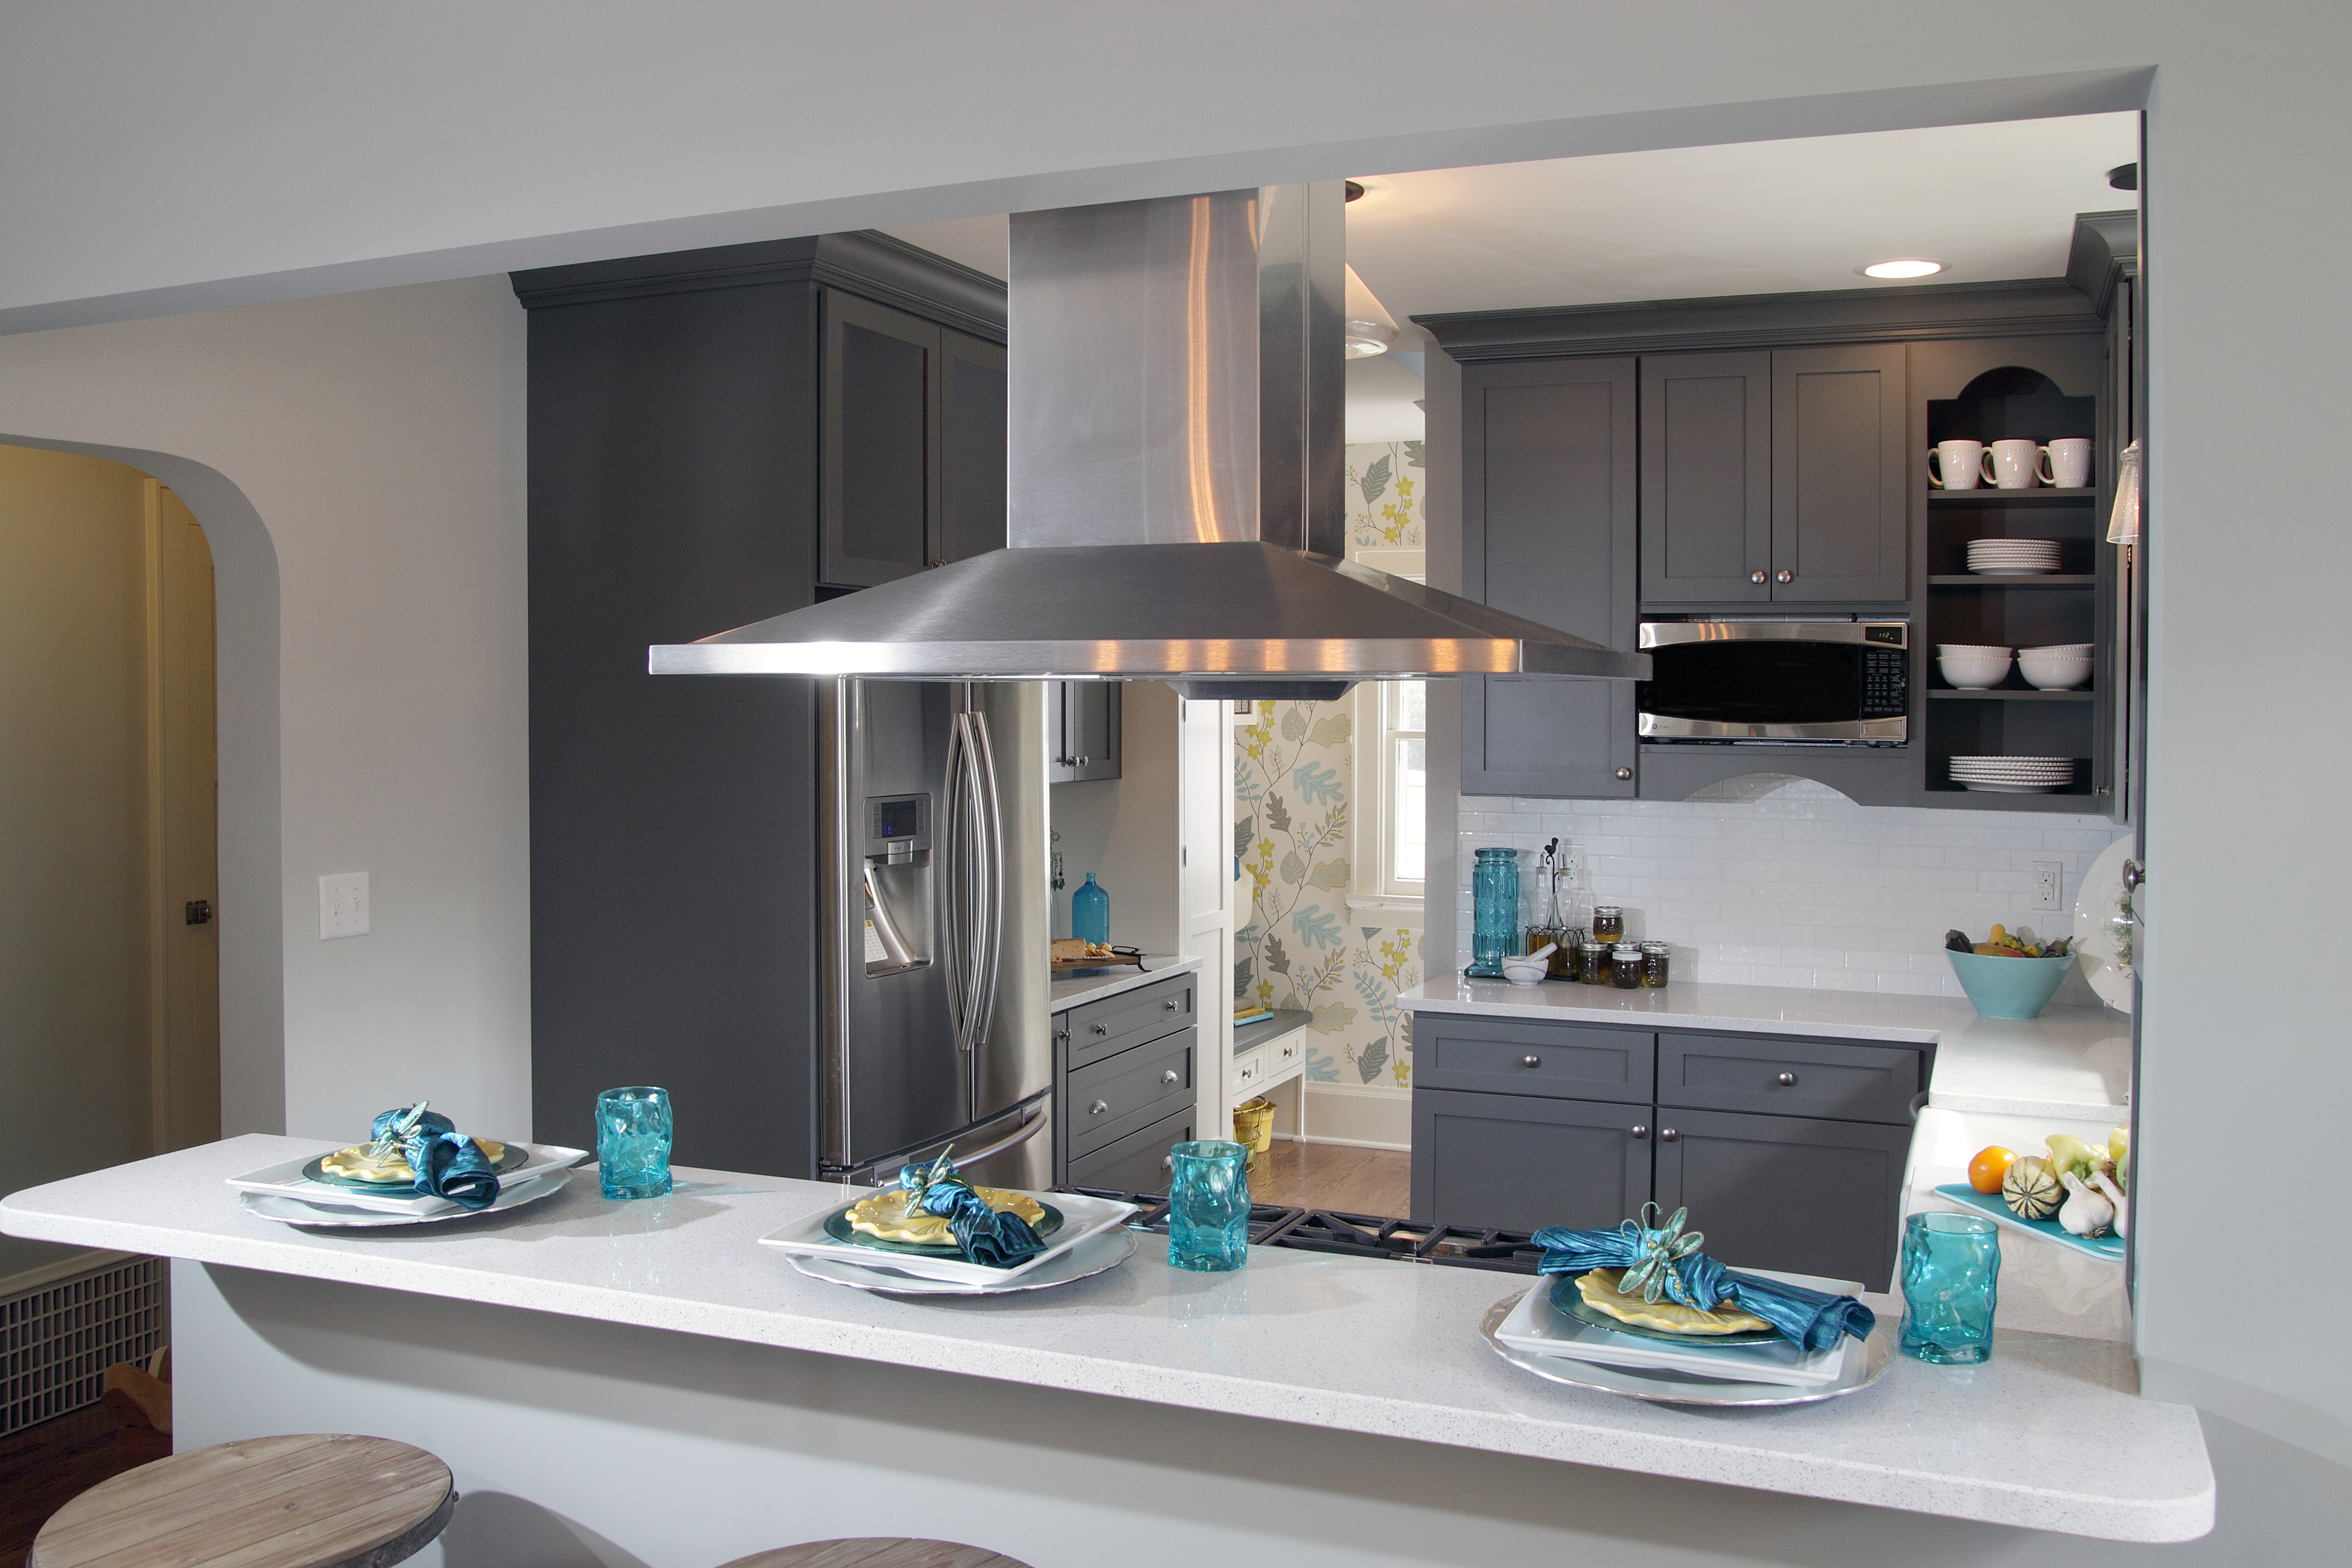 A dark gray painted kitchen deisgn with a peninsula with seating for guests to watch as the chef cooks and entertains.